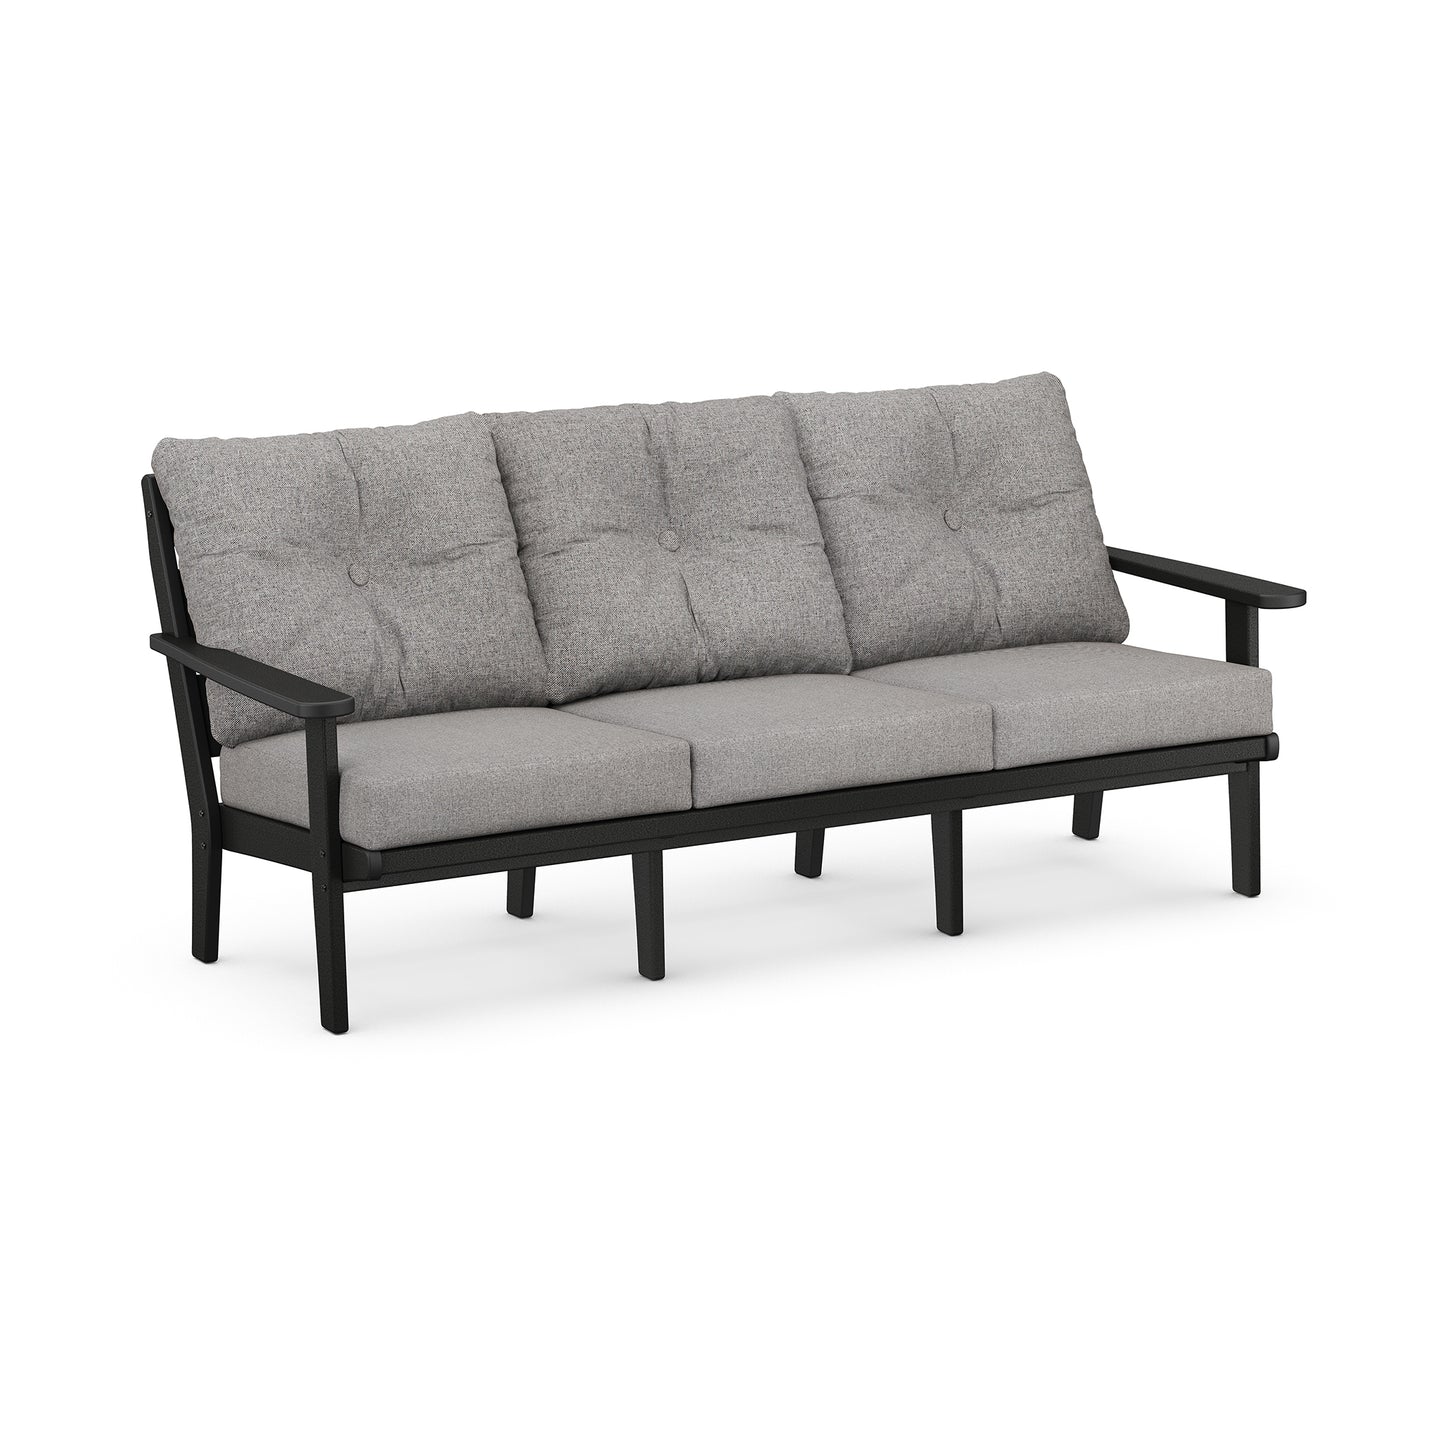 A contemporary three-seater all-weather outdoor sofa with gray tufted upholstery and a black POLYWOOD® lumber frame, isolated on a white background.